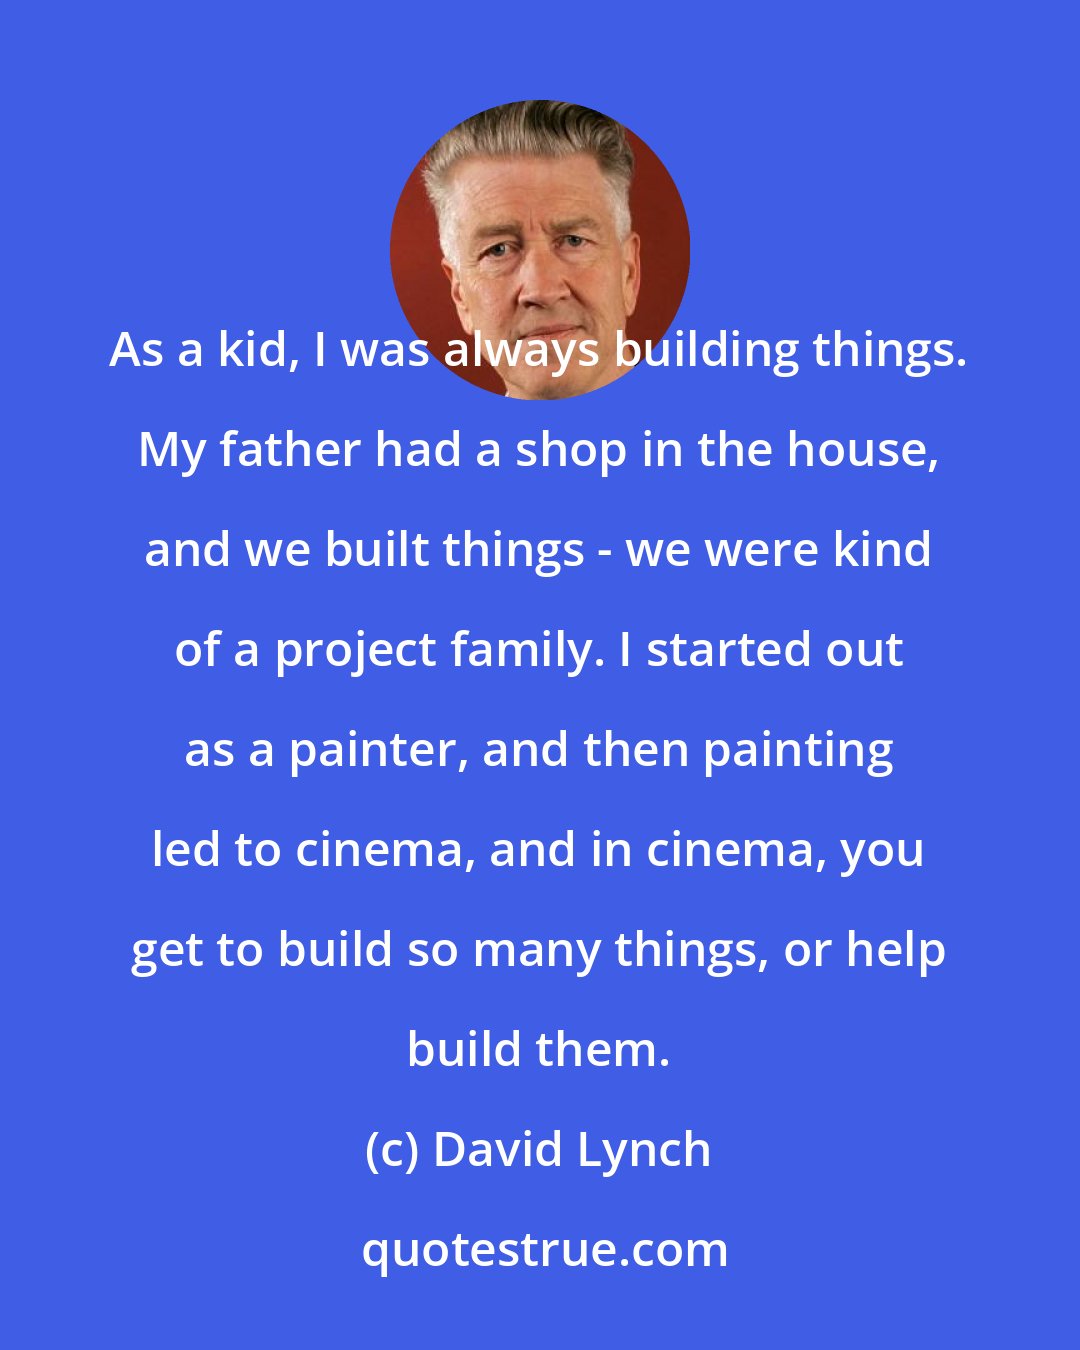 David Lynch: As a kid, I was always building things. My father had a shop in the house, and we built things - we were kind of a project family. I started out as a painter, and then painting led to cinema, and in cinema, you get to build so many things, or help build them.